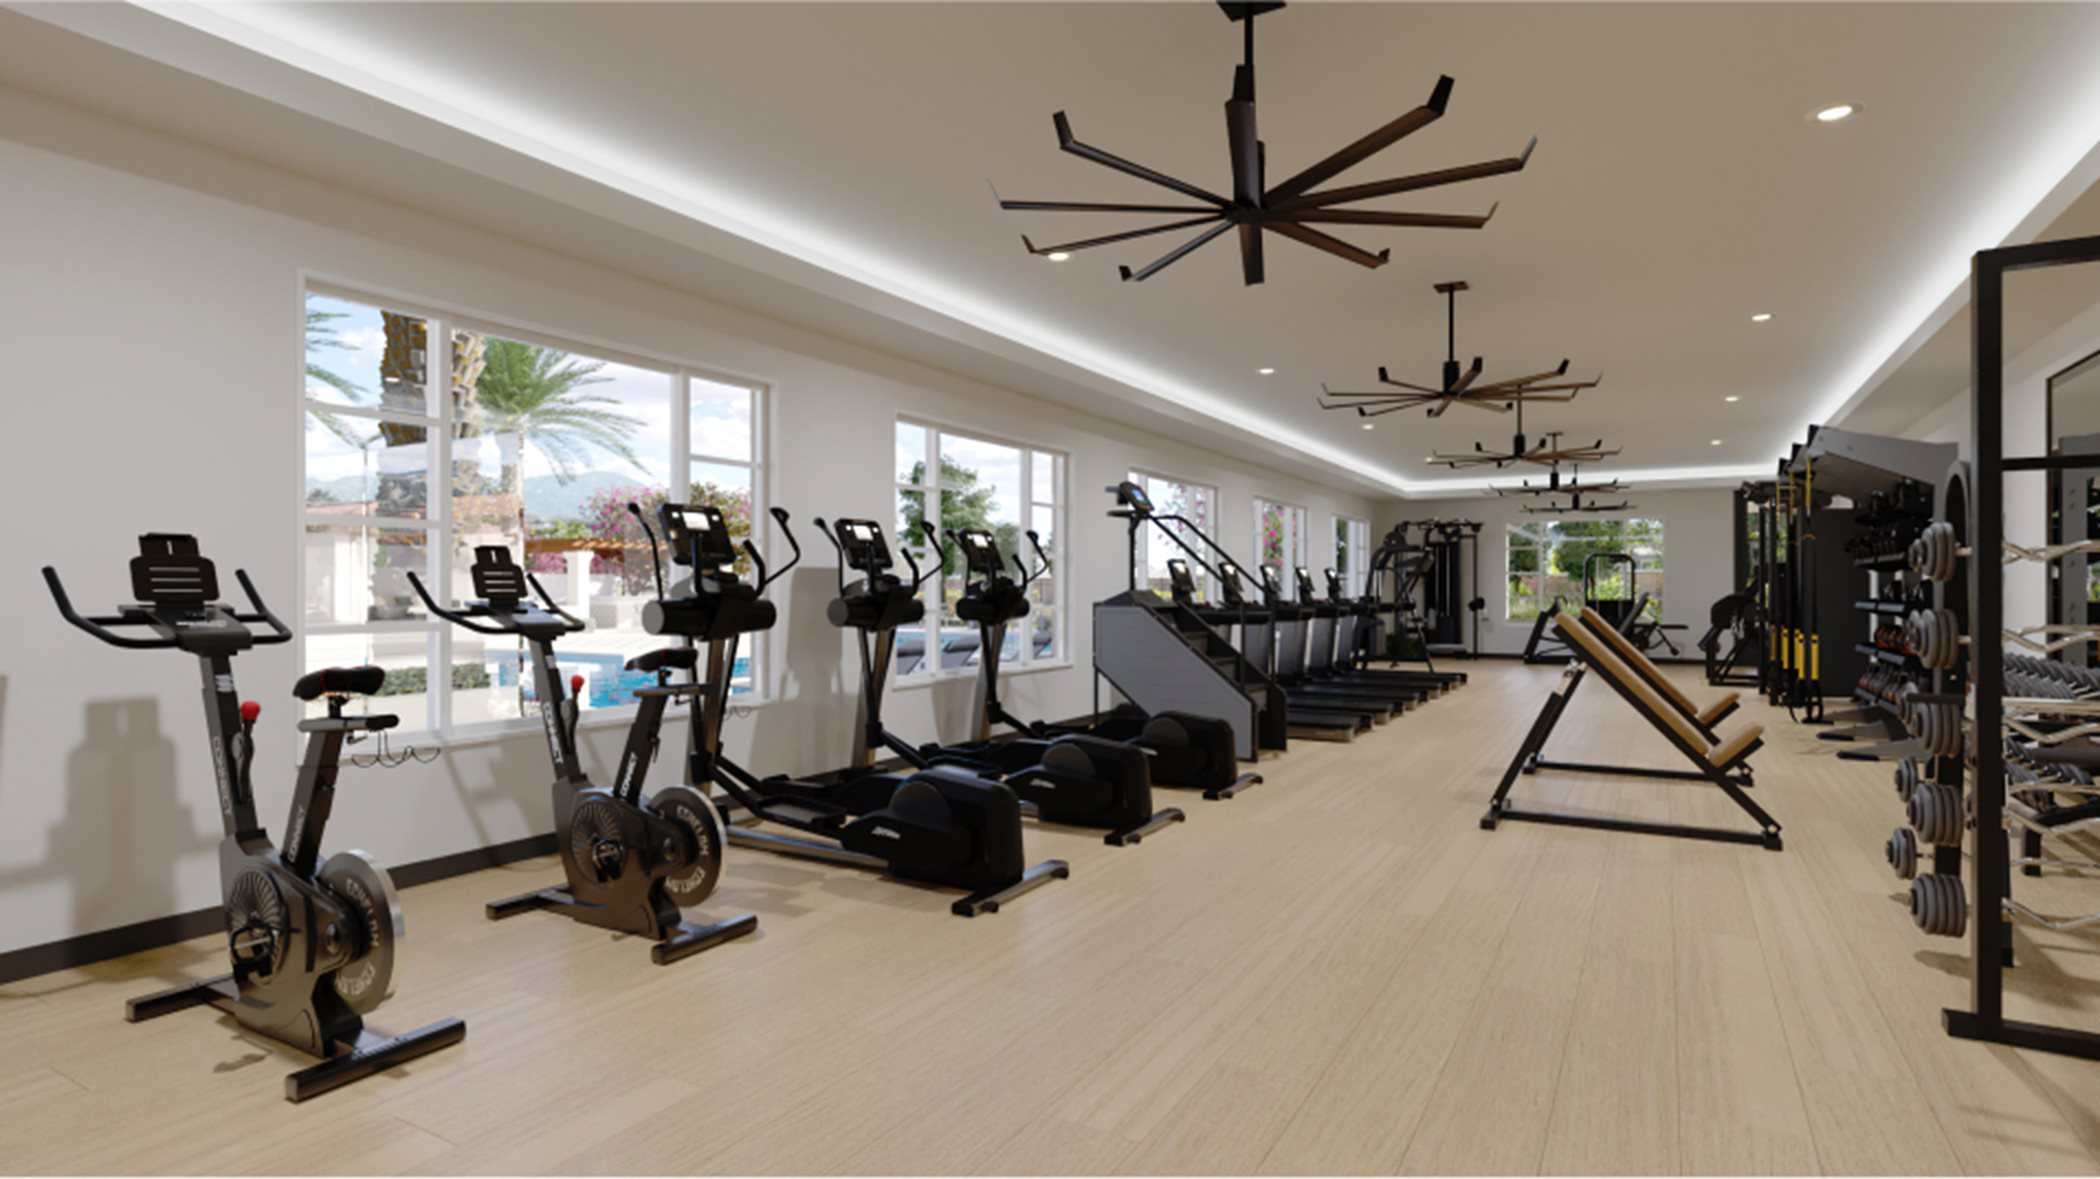 Fitness center with lots of equipment